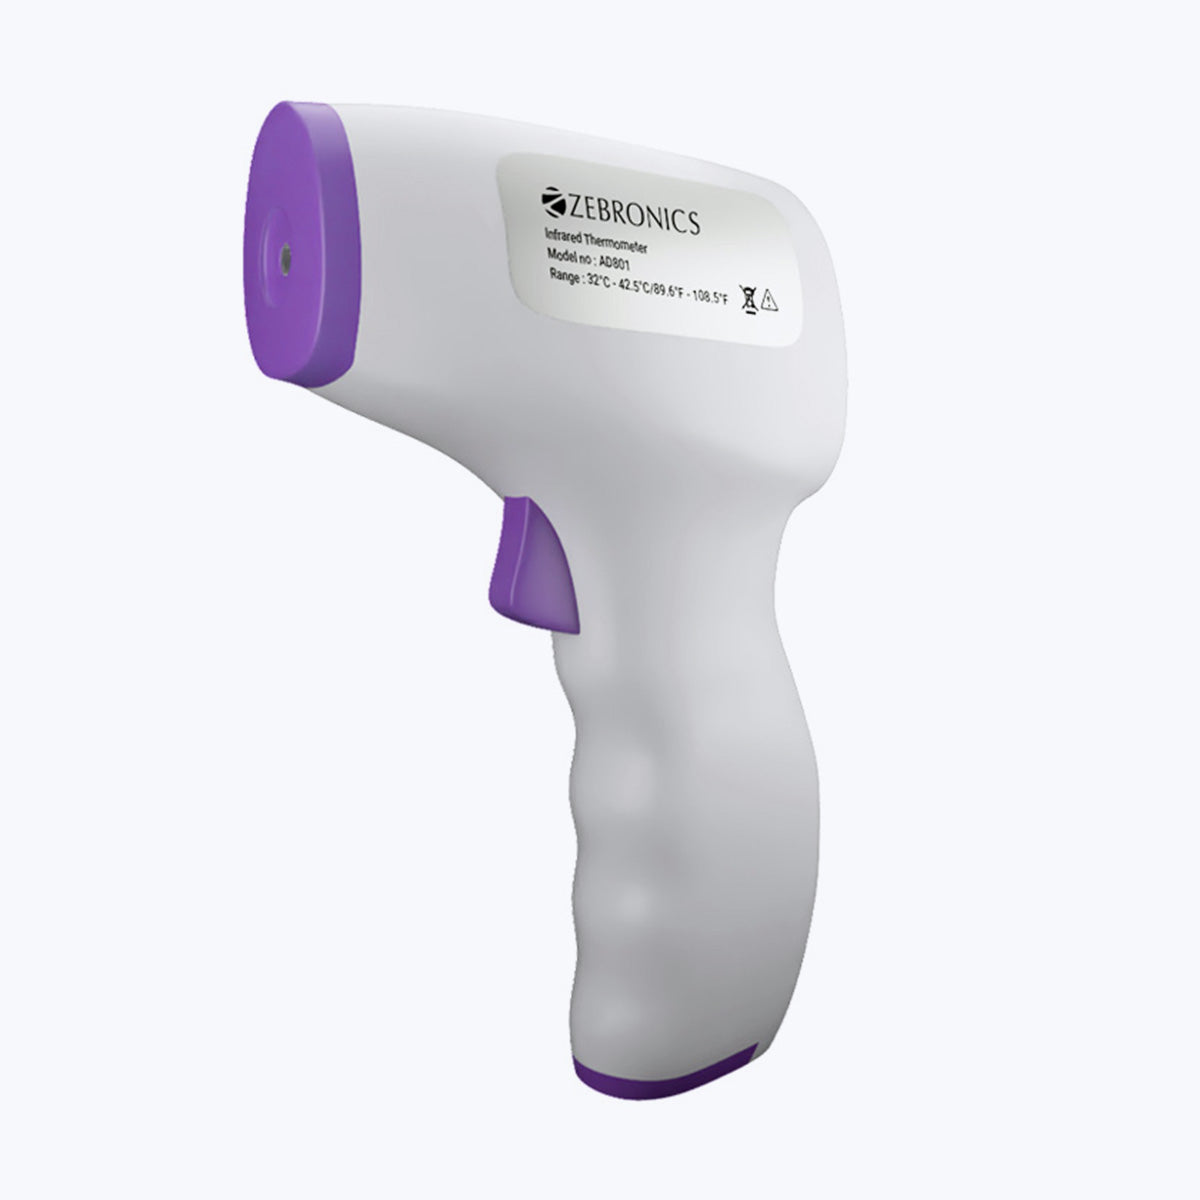 AD801 -  Contactless Infrared Thermometer - Zebronics